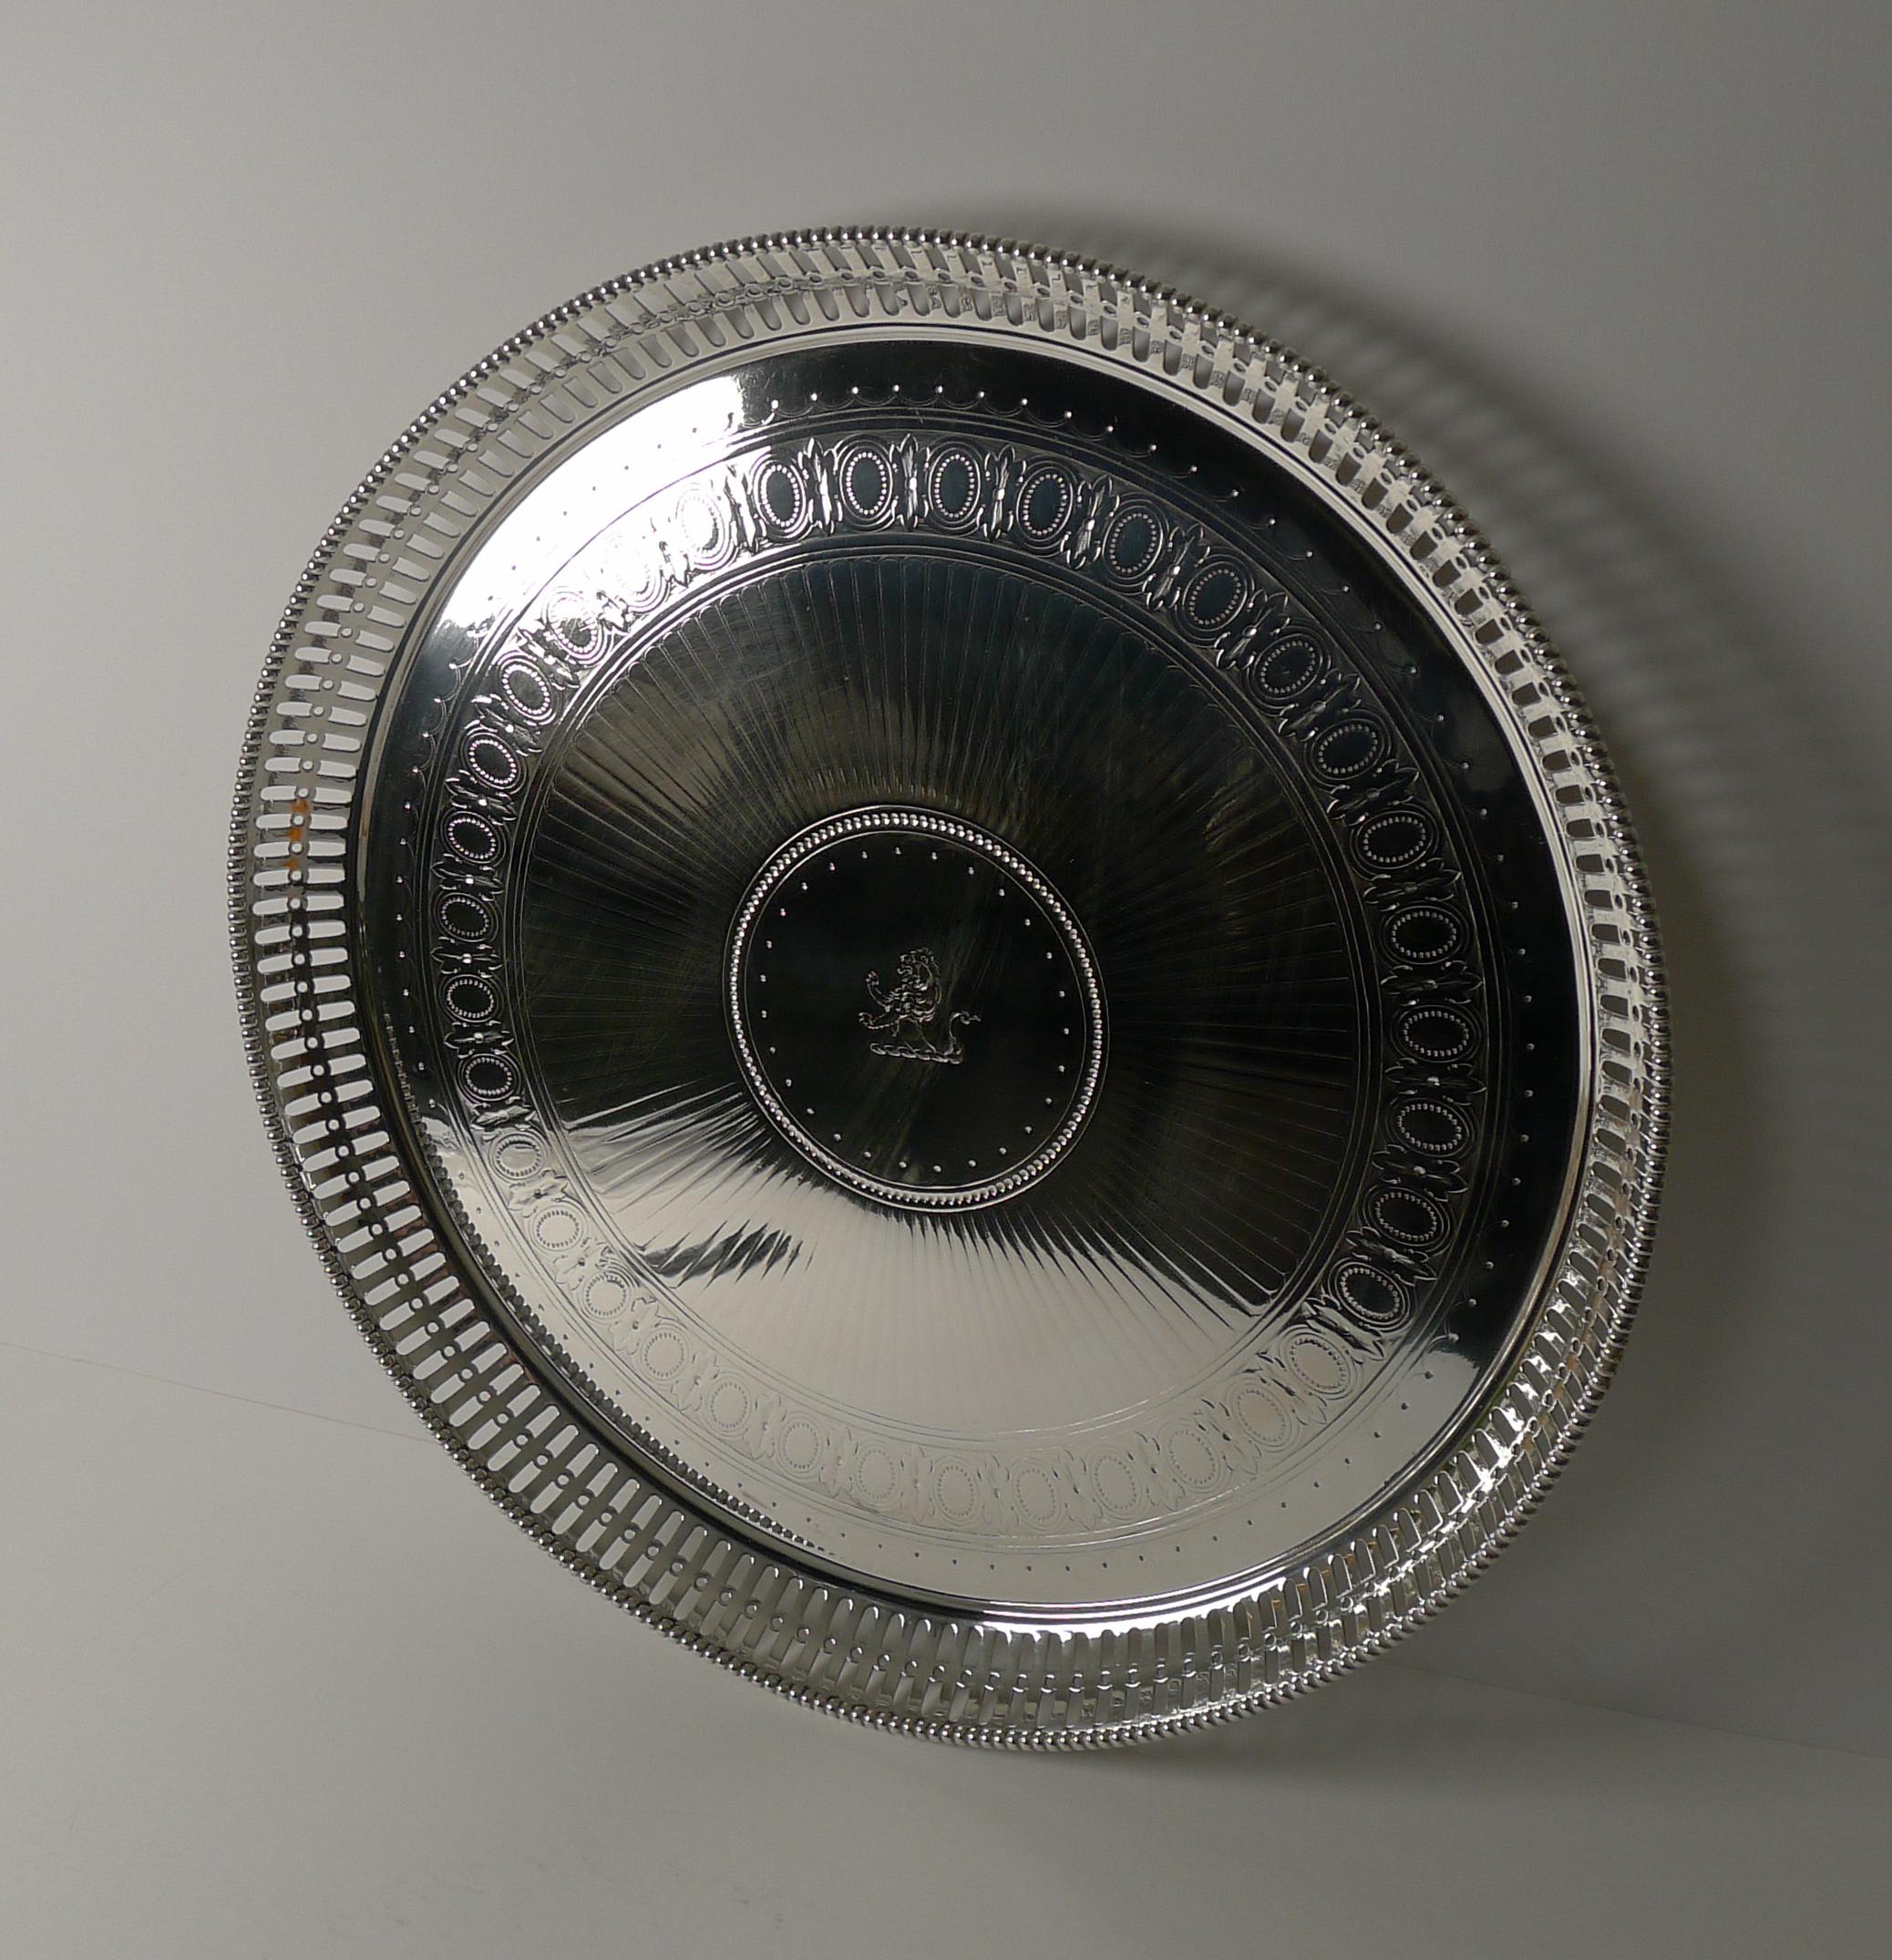 A stunning large antique English circular drinks tray made in silver plate by the top notch silversmith, Elkington and Co.; fully marked on the underside. Being Elkington, we are able to date the piece accurately (letter O) to the year 1875, a true